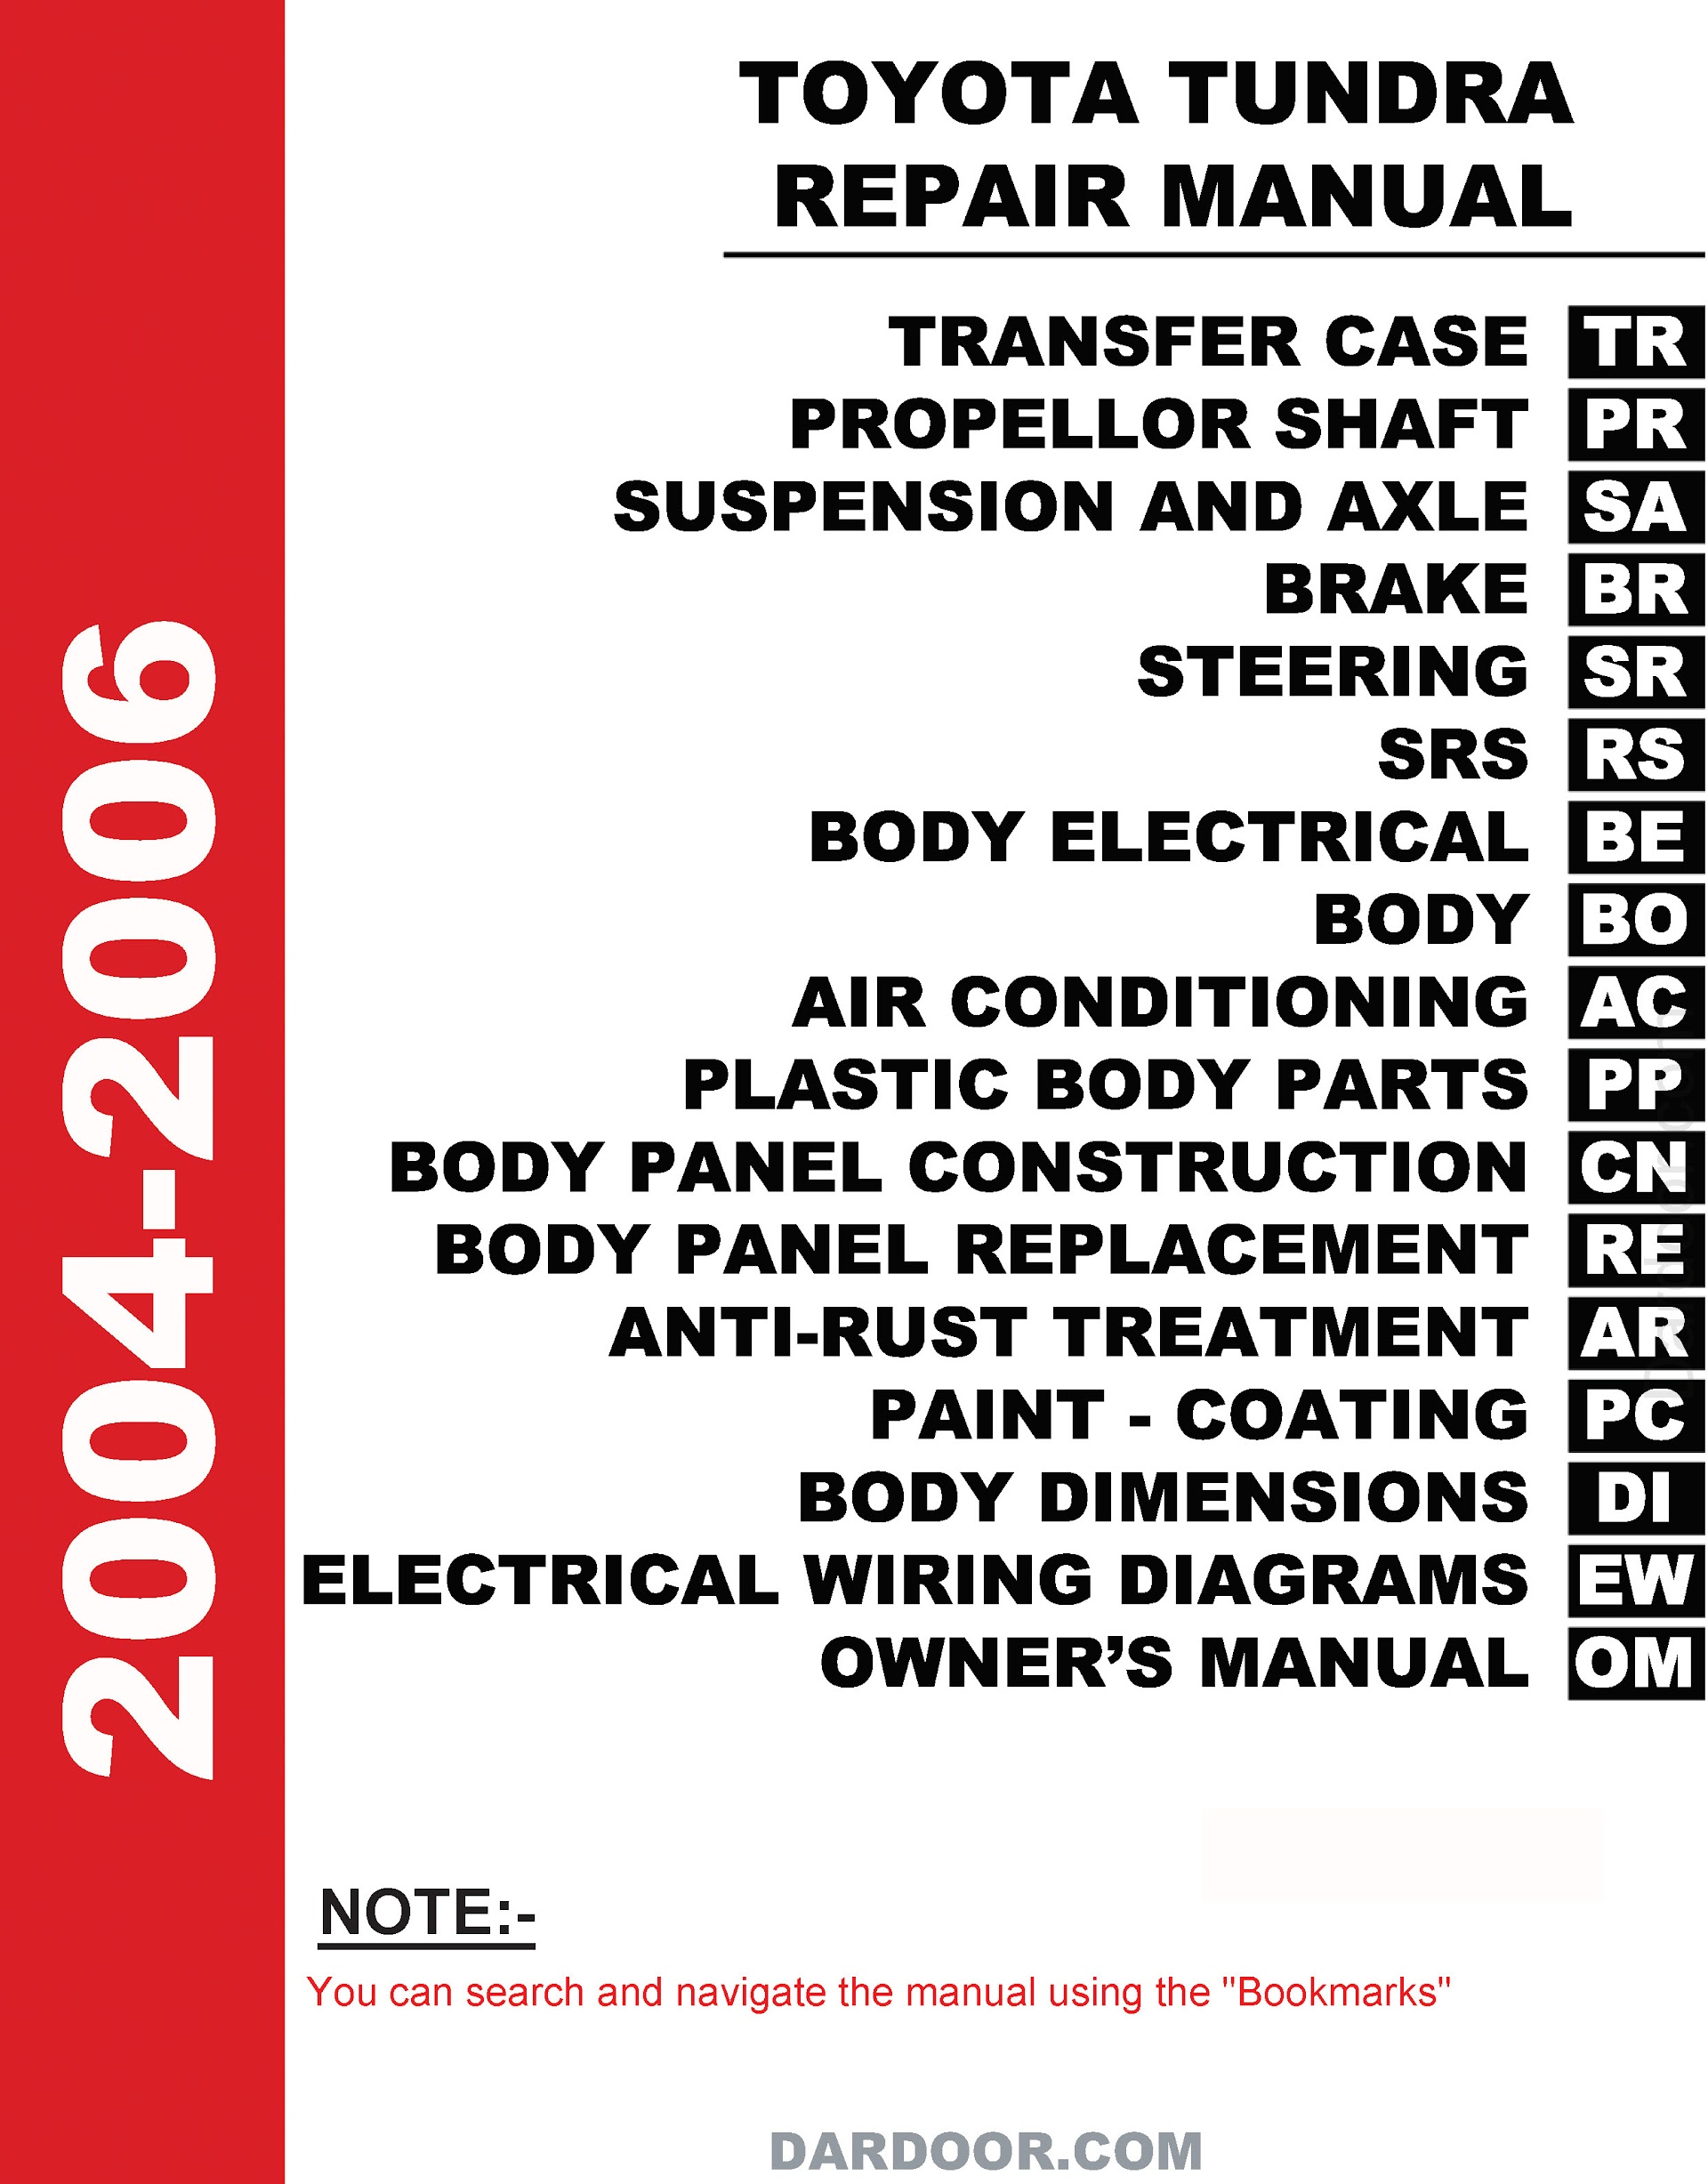 Table of Contents 2004-2006 Toyota Tundra Repair Manual